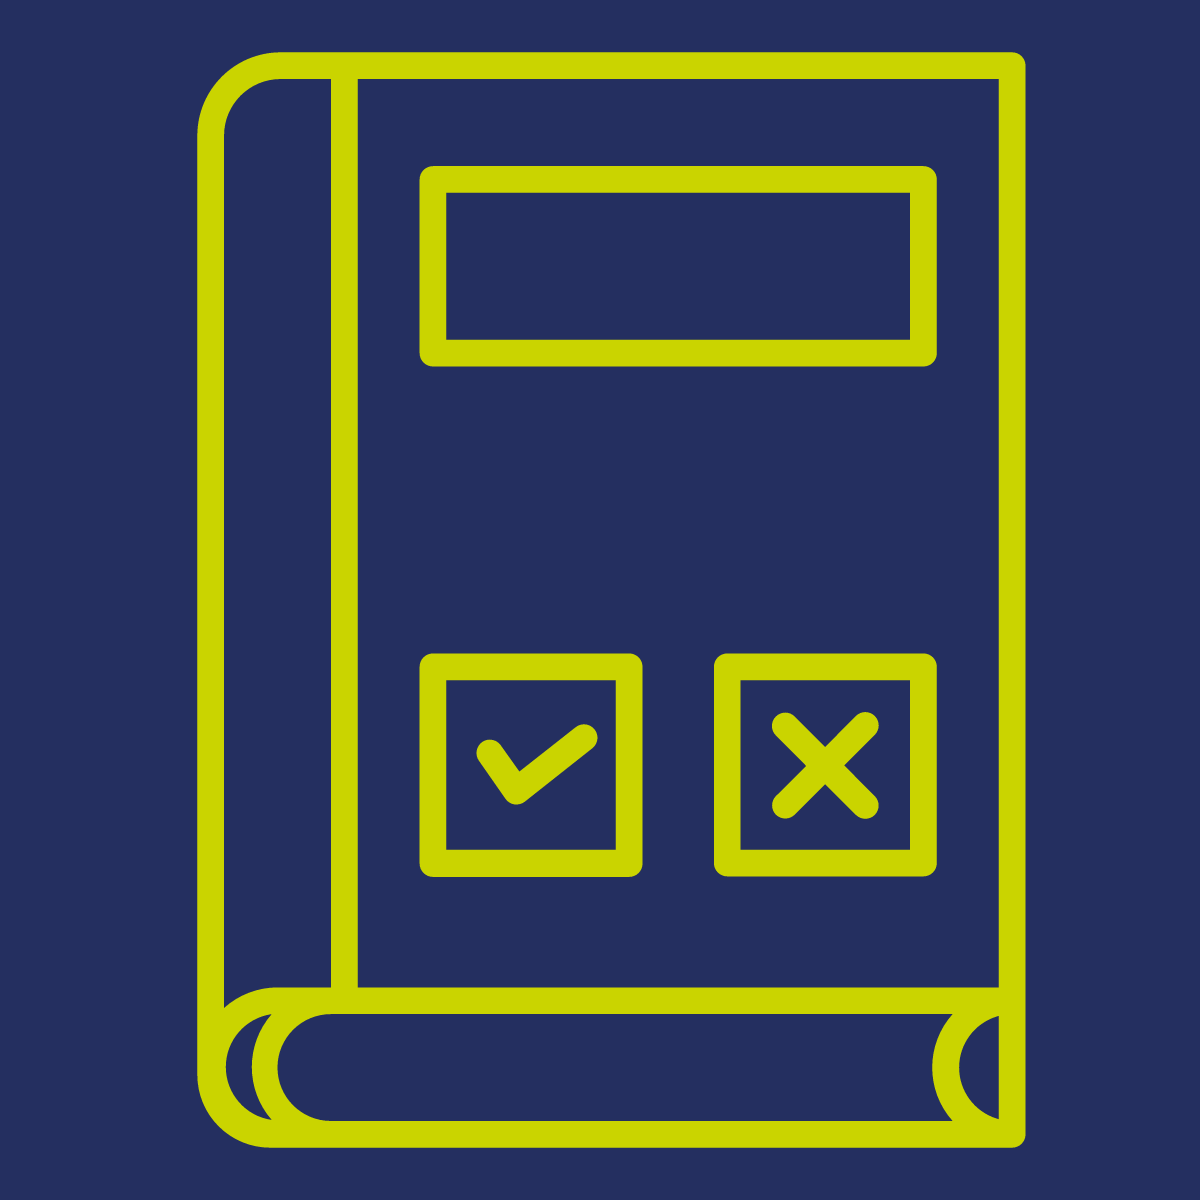 Green icon of a book on a dark blue background